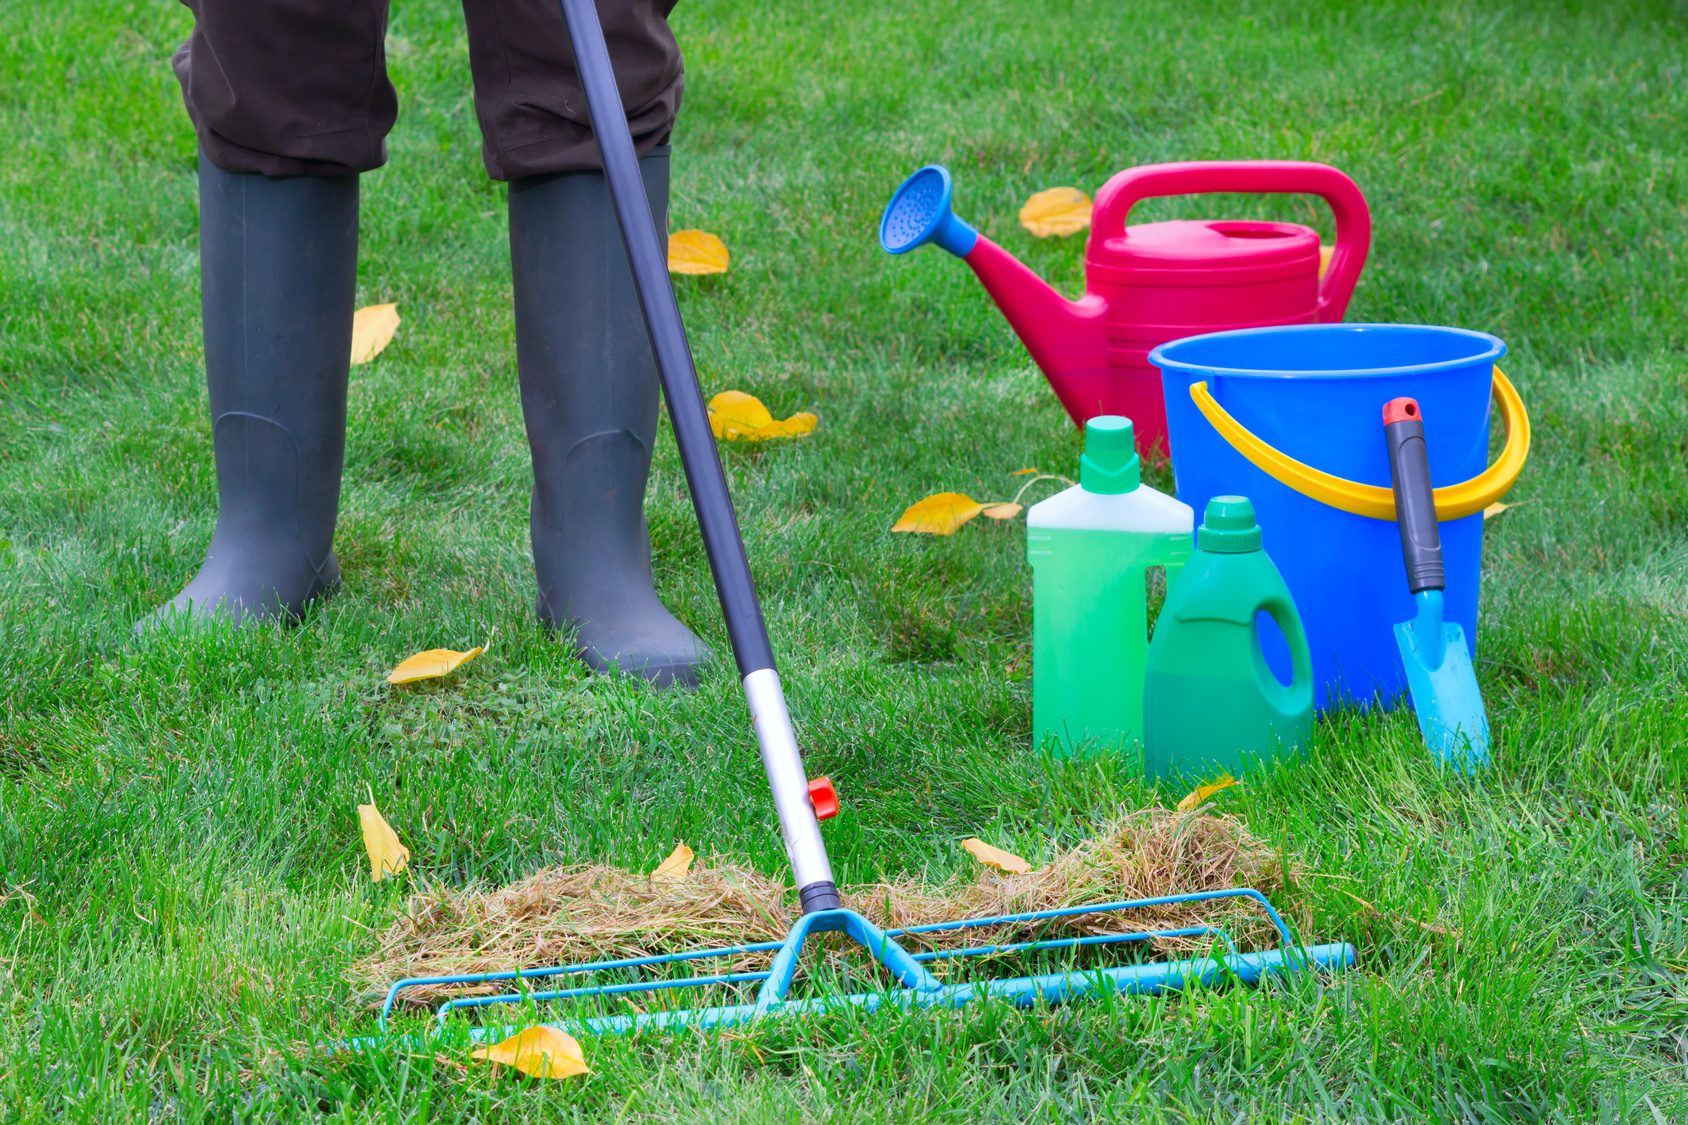 Top 5 Tips for Lawn Care in Fall | Central Services Co. Inc.